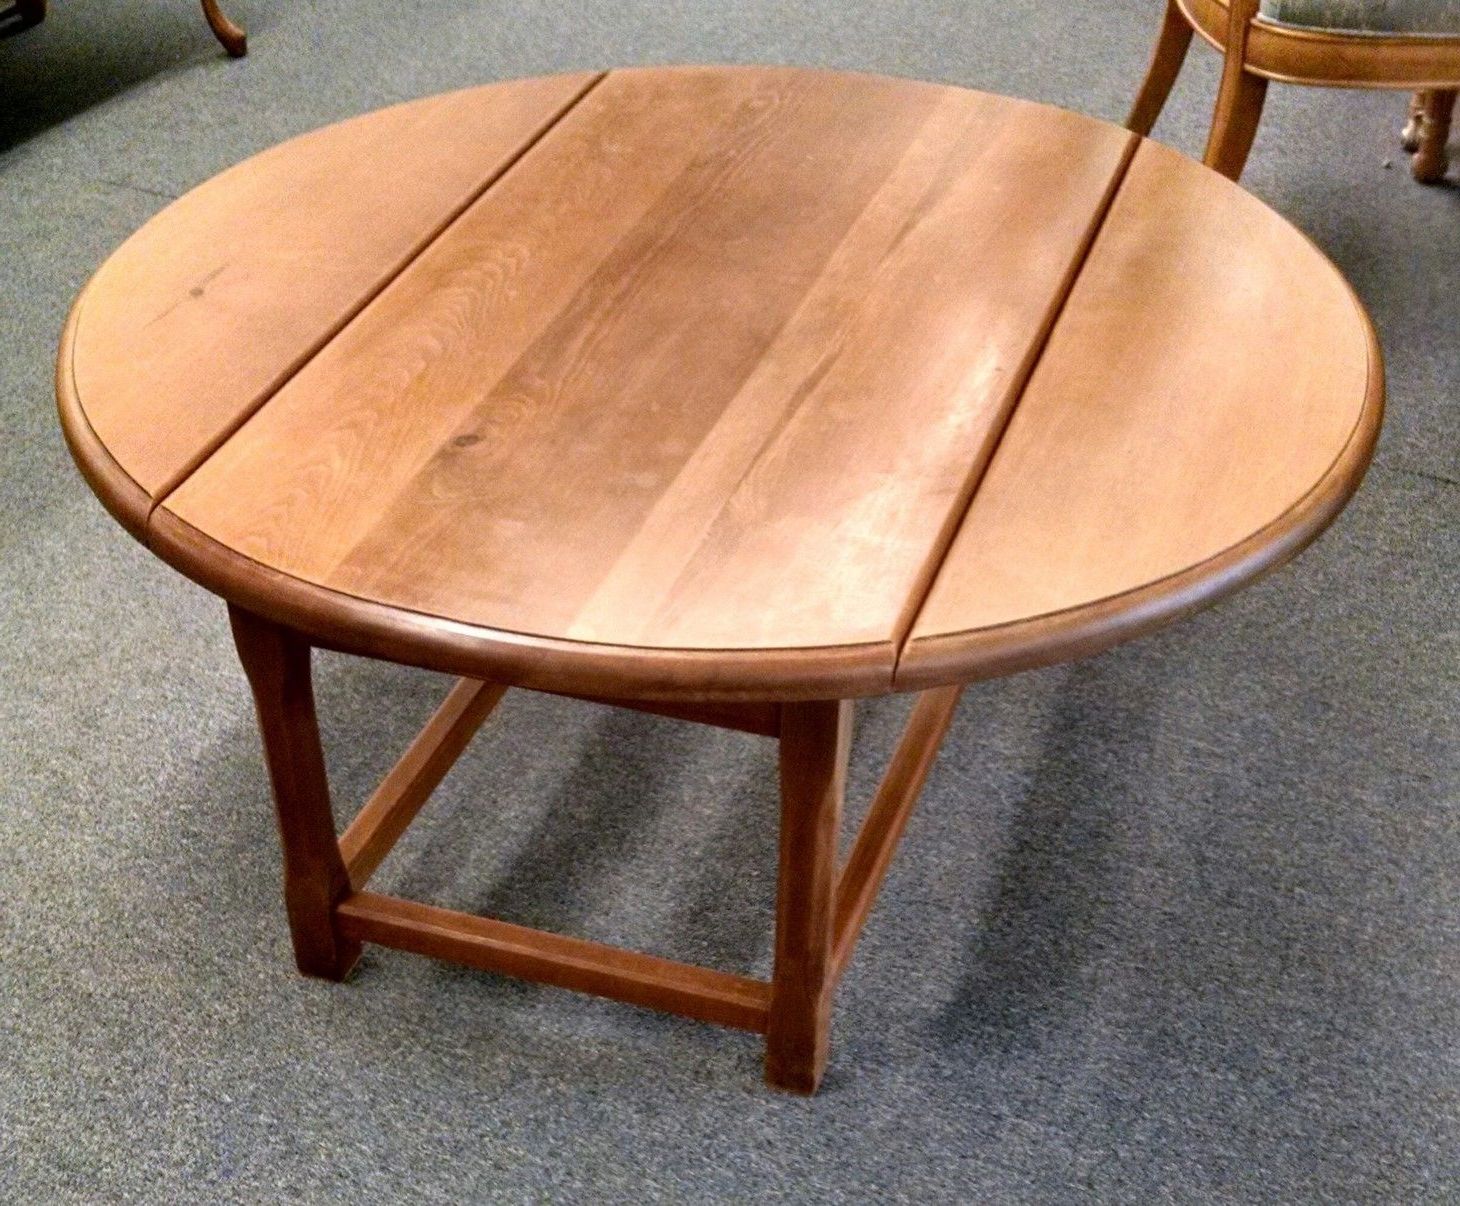 Delmarva Furniture Consignment Pertaining To 2019 Leaf Round Coffee Tables (View 3 of 20)